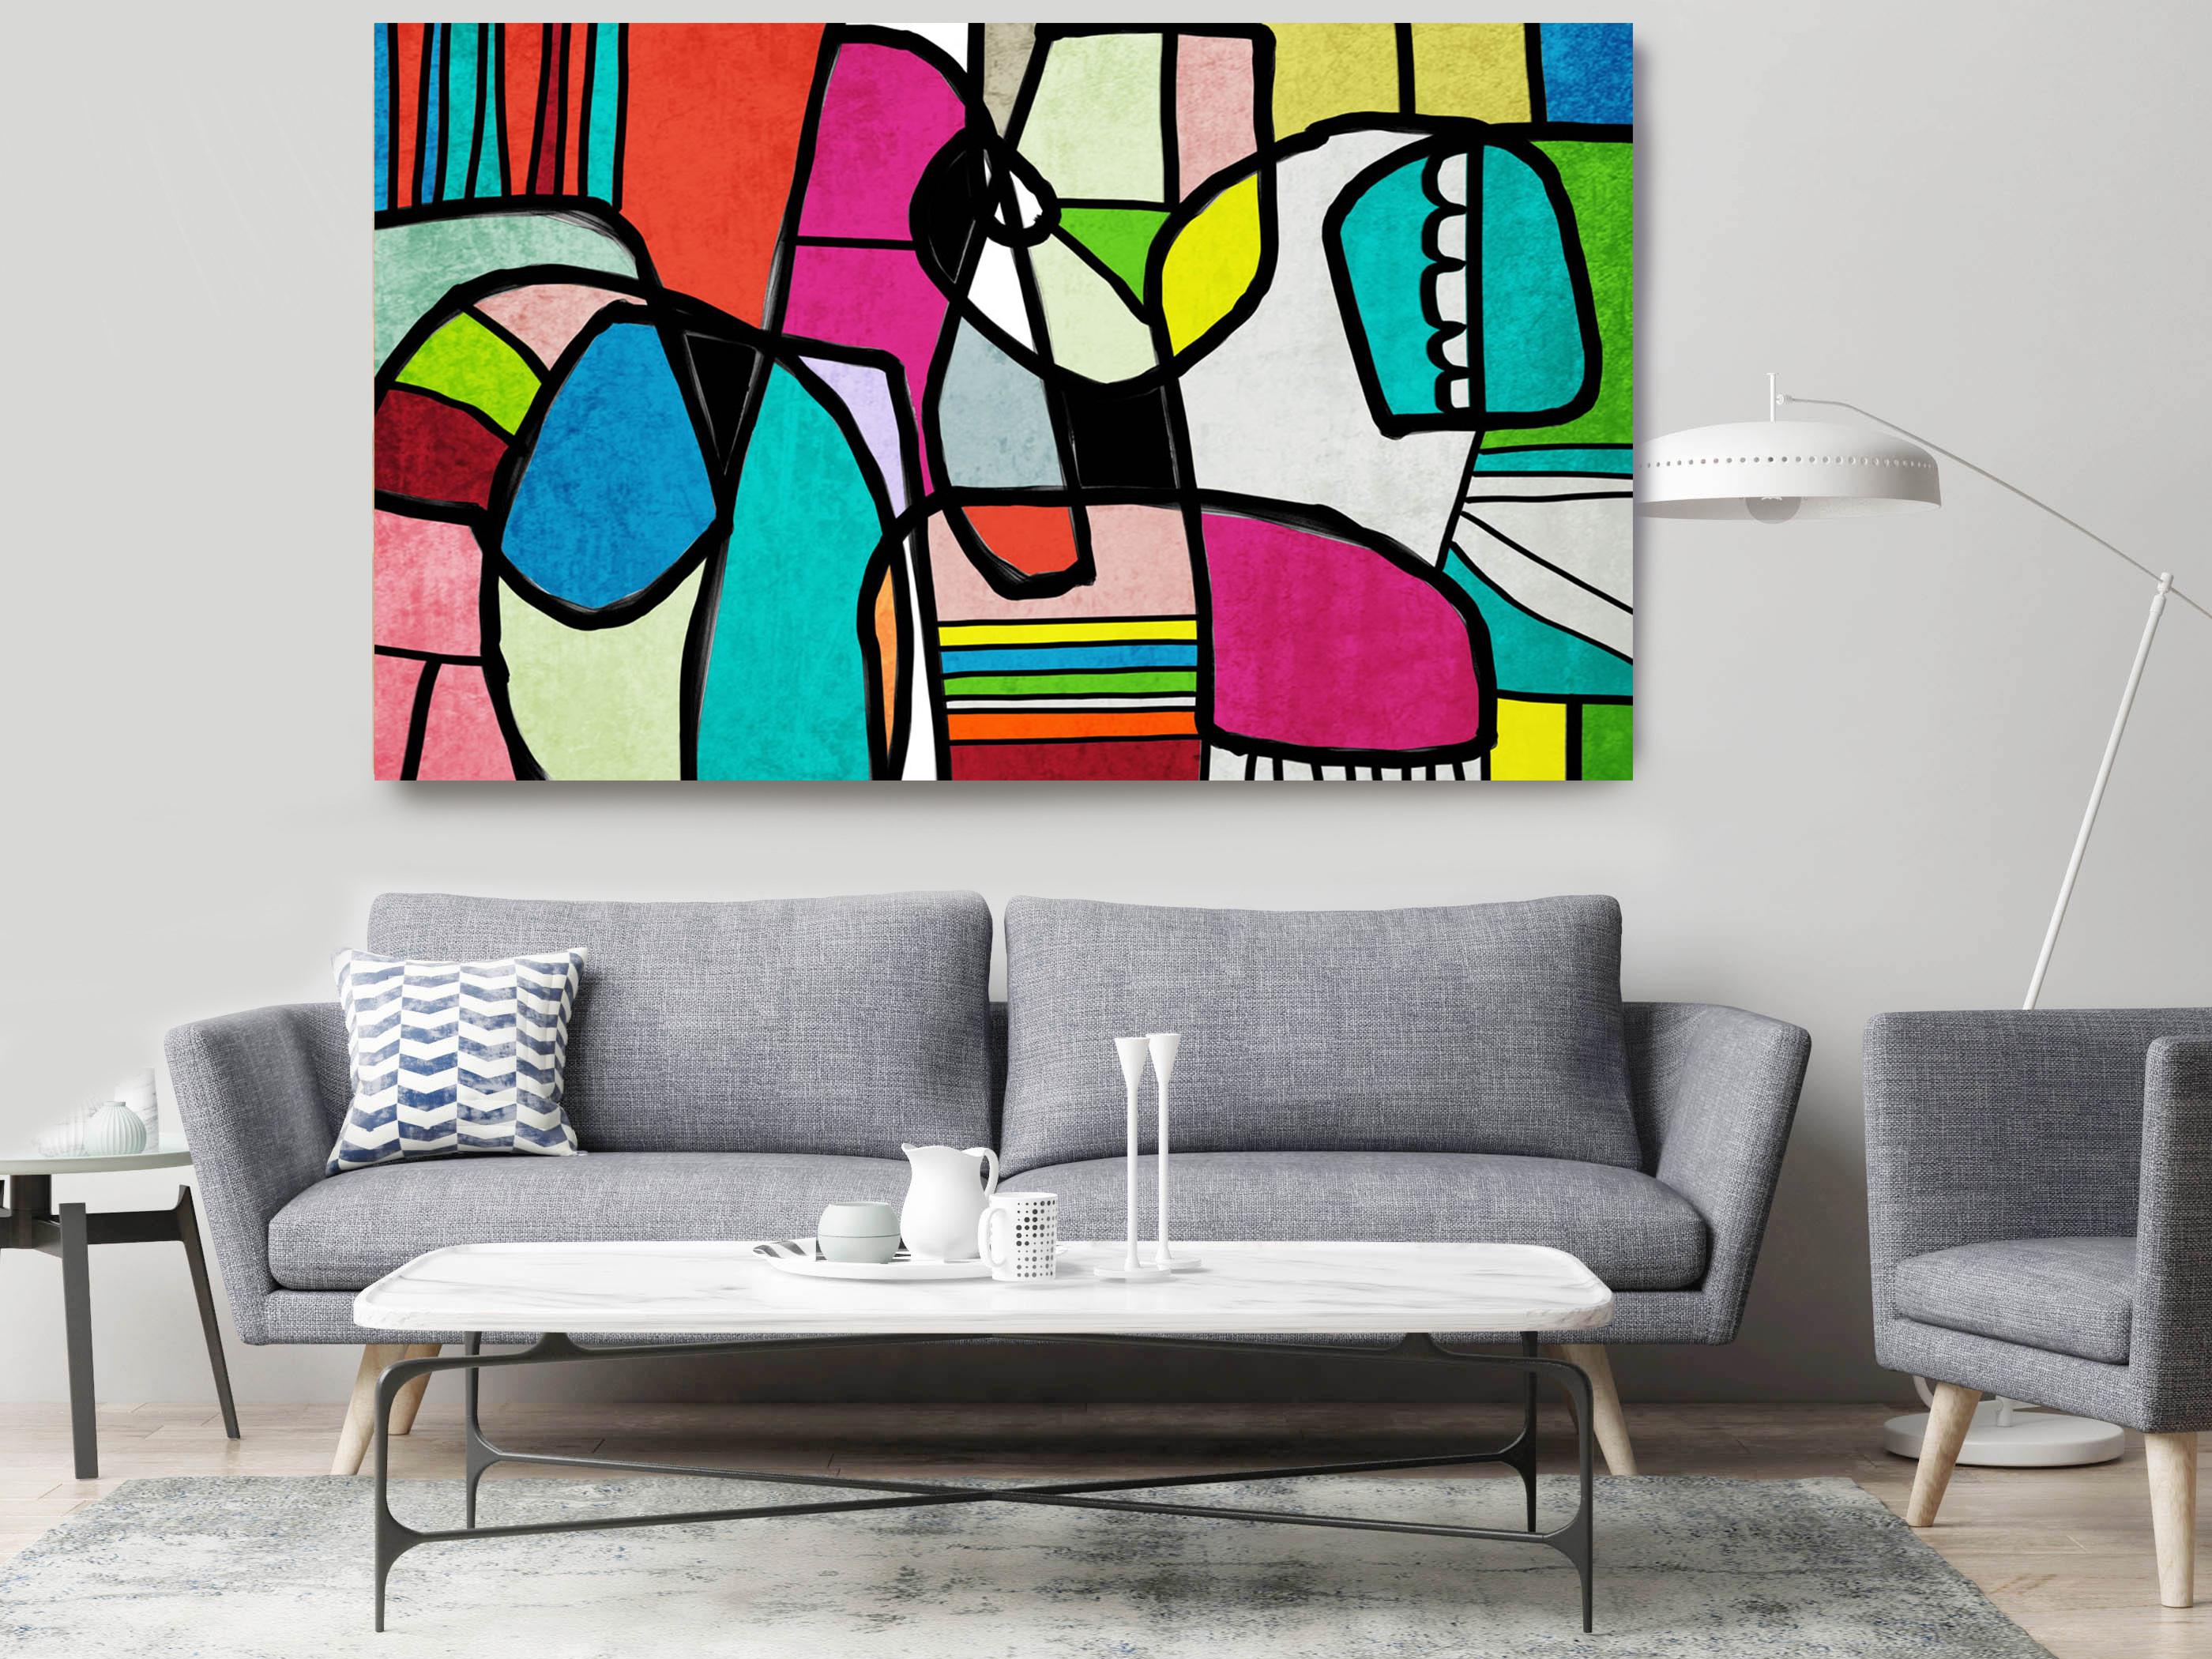 Irena Orlov Abstract Print - Abstract Vivid BOHO Painting Hand Embellished Giclee on Canvas